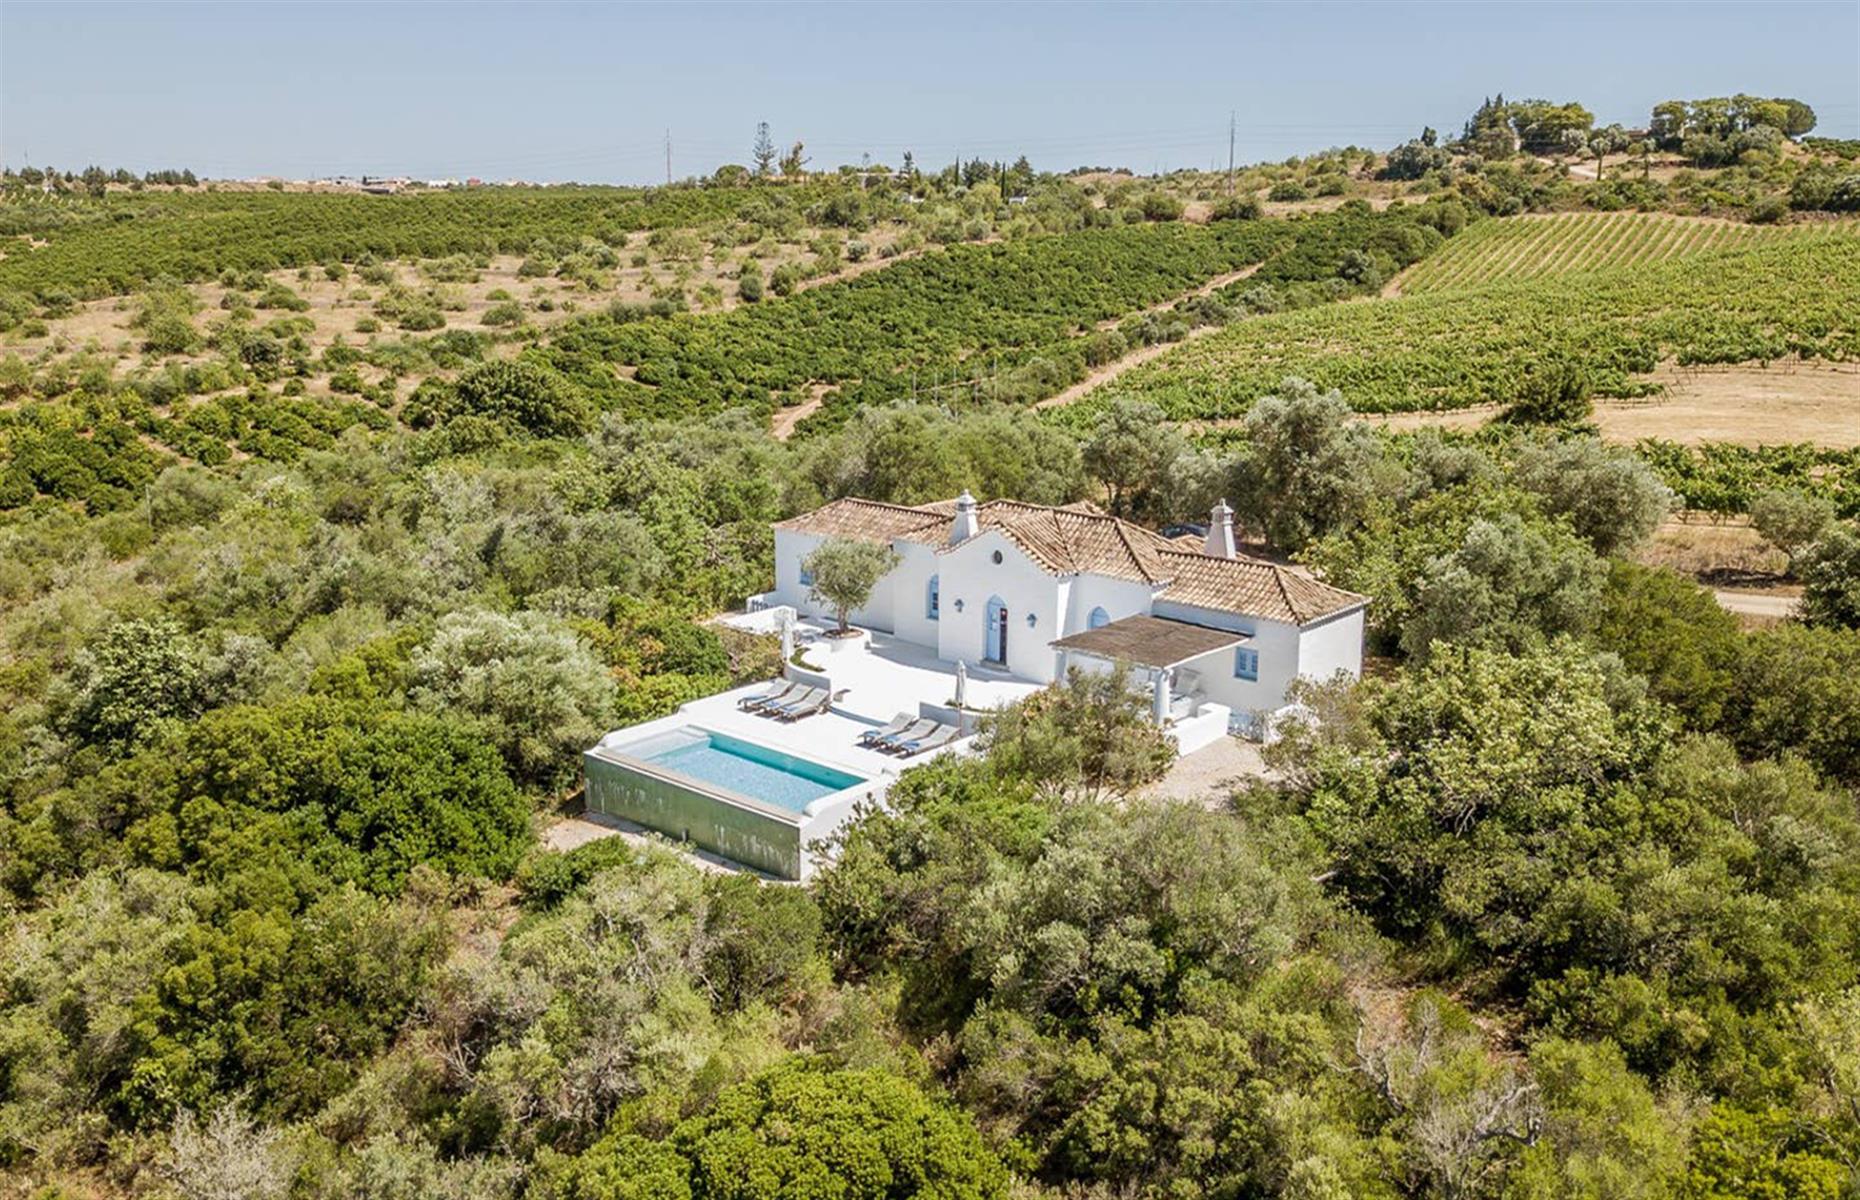 <p>Surrounded by picturesque vineyards, <a href="https://www.airbnb.co.uk/rooms/18575757">Casa do Planalto</a> is a stunning three-bedroom villa that occupies one of Algarve's most stunning spots. Although it's in a rural setting, 38 miles (62km) from Faro, the villa has all the amenities of a modern home, from Wi-Fi and air-con to a TV and a fully-equipped kitchen. There's also an infinity pool looking out to the storybook countryside beyond. These are <a href="https://www.loveexploring.com/galleries/84953/the-worlds-most-remote-hotels">the world's most remote hotels</a>.</p>